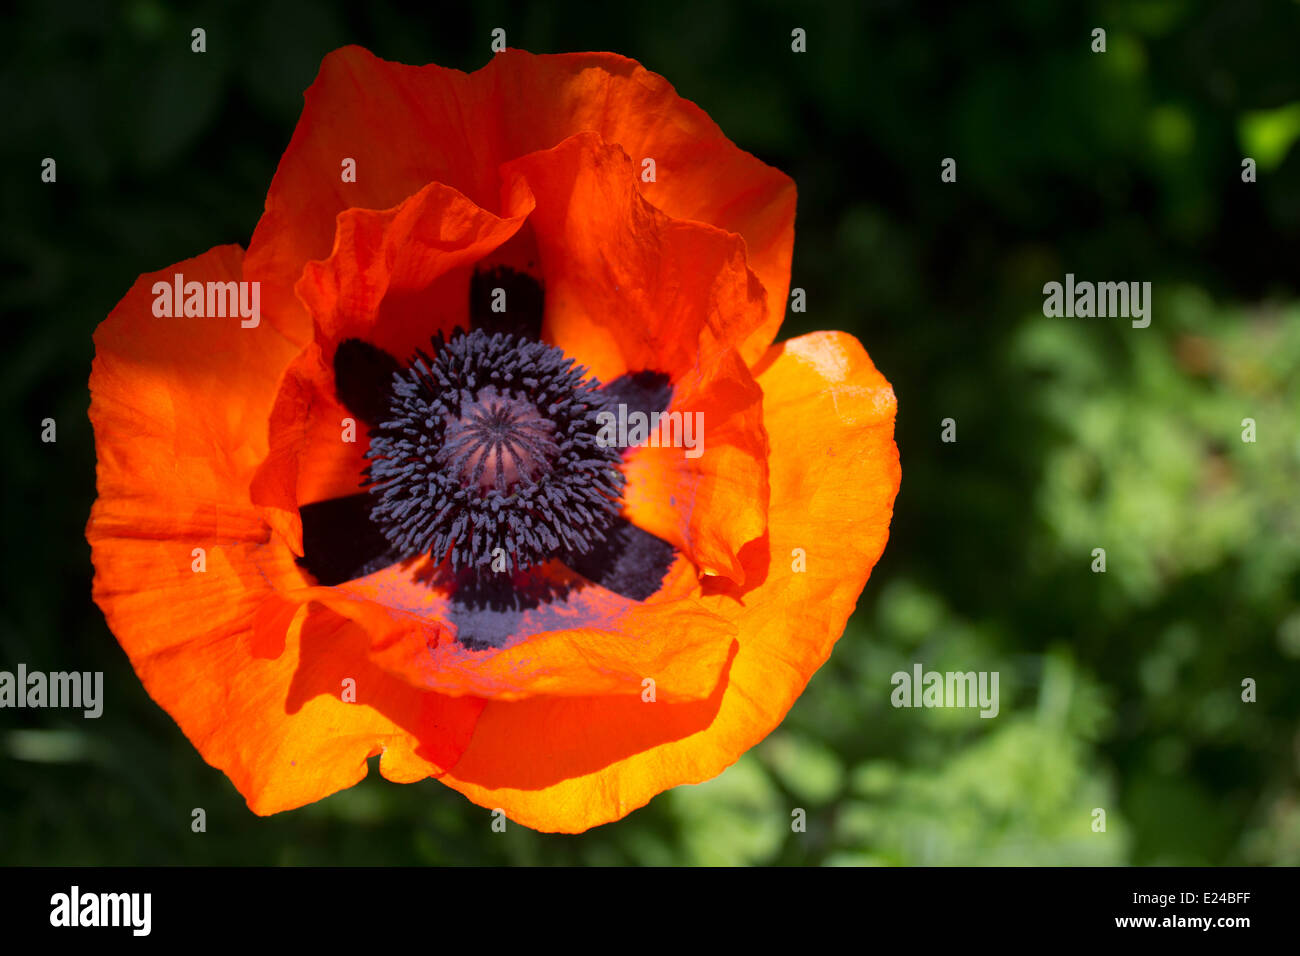 This is an oriental poppy or the PAPAVER orientale ‘Allegro’. A fiery orange flower with a deep purple to black center. Stock Photo